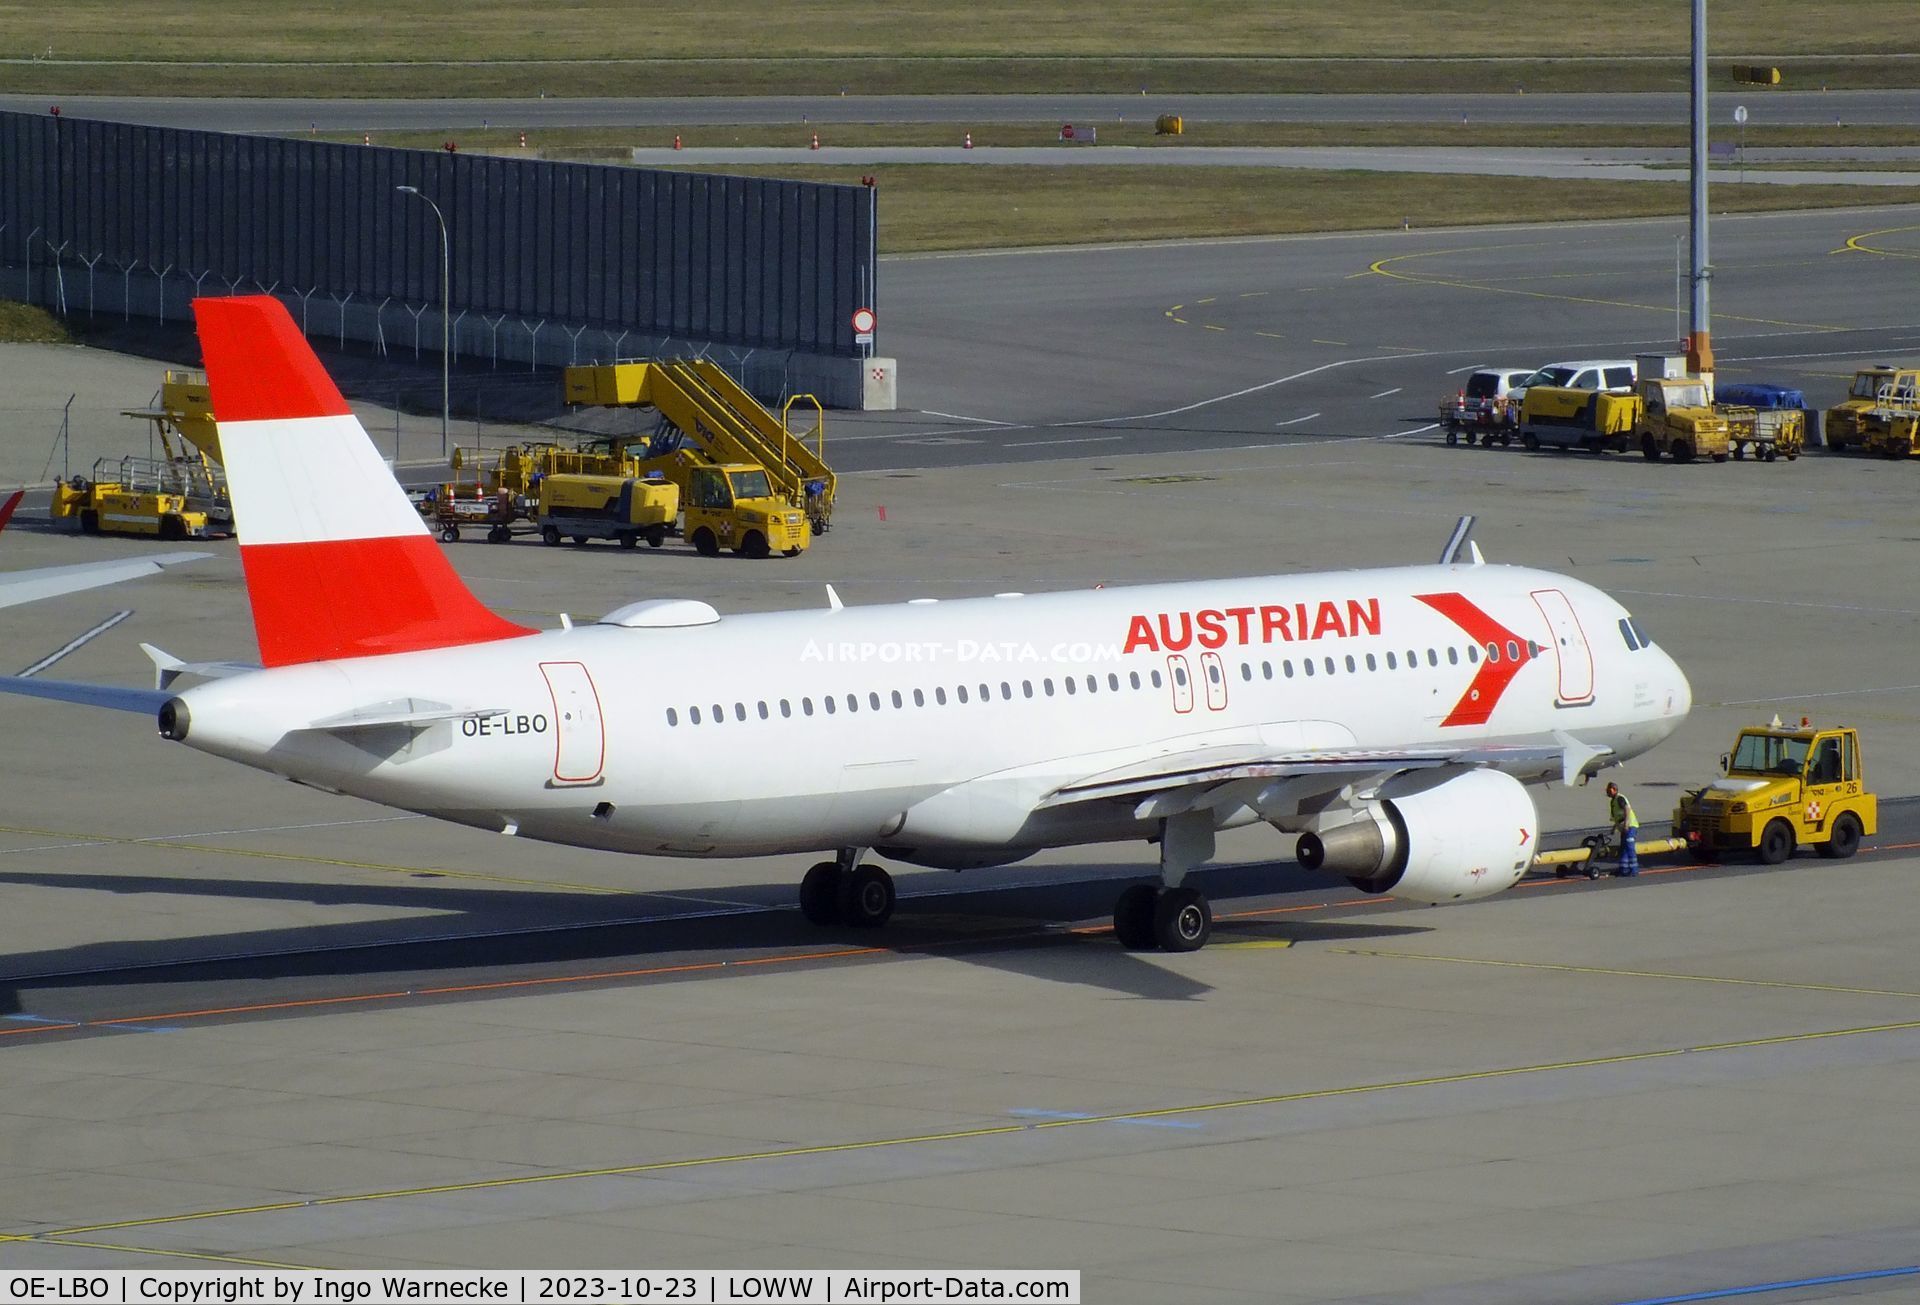 OE-LBO, 1998 Airbus A320-214 C/N 776, Airbus A320-214 of Austrian Airlines at Wien-Schwechat airport